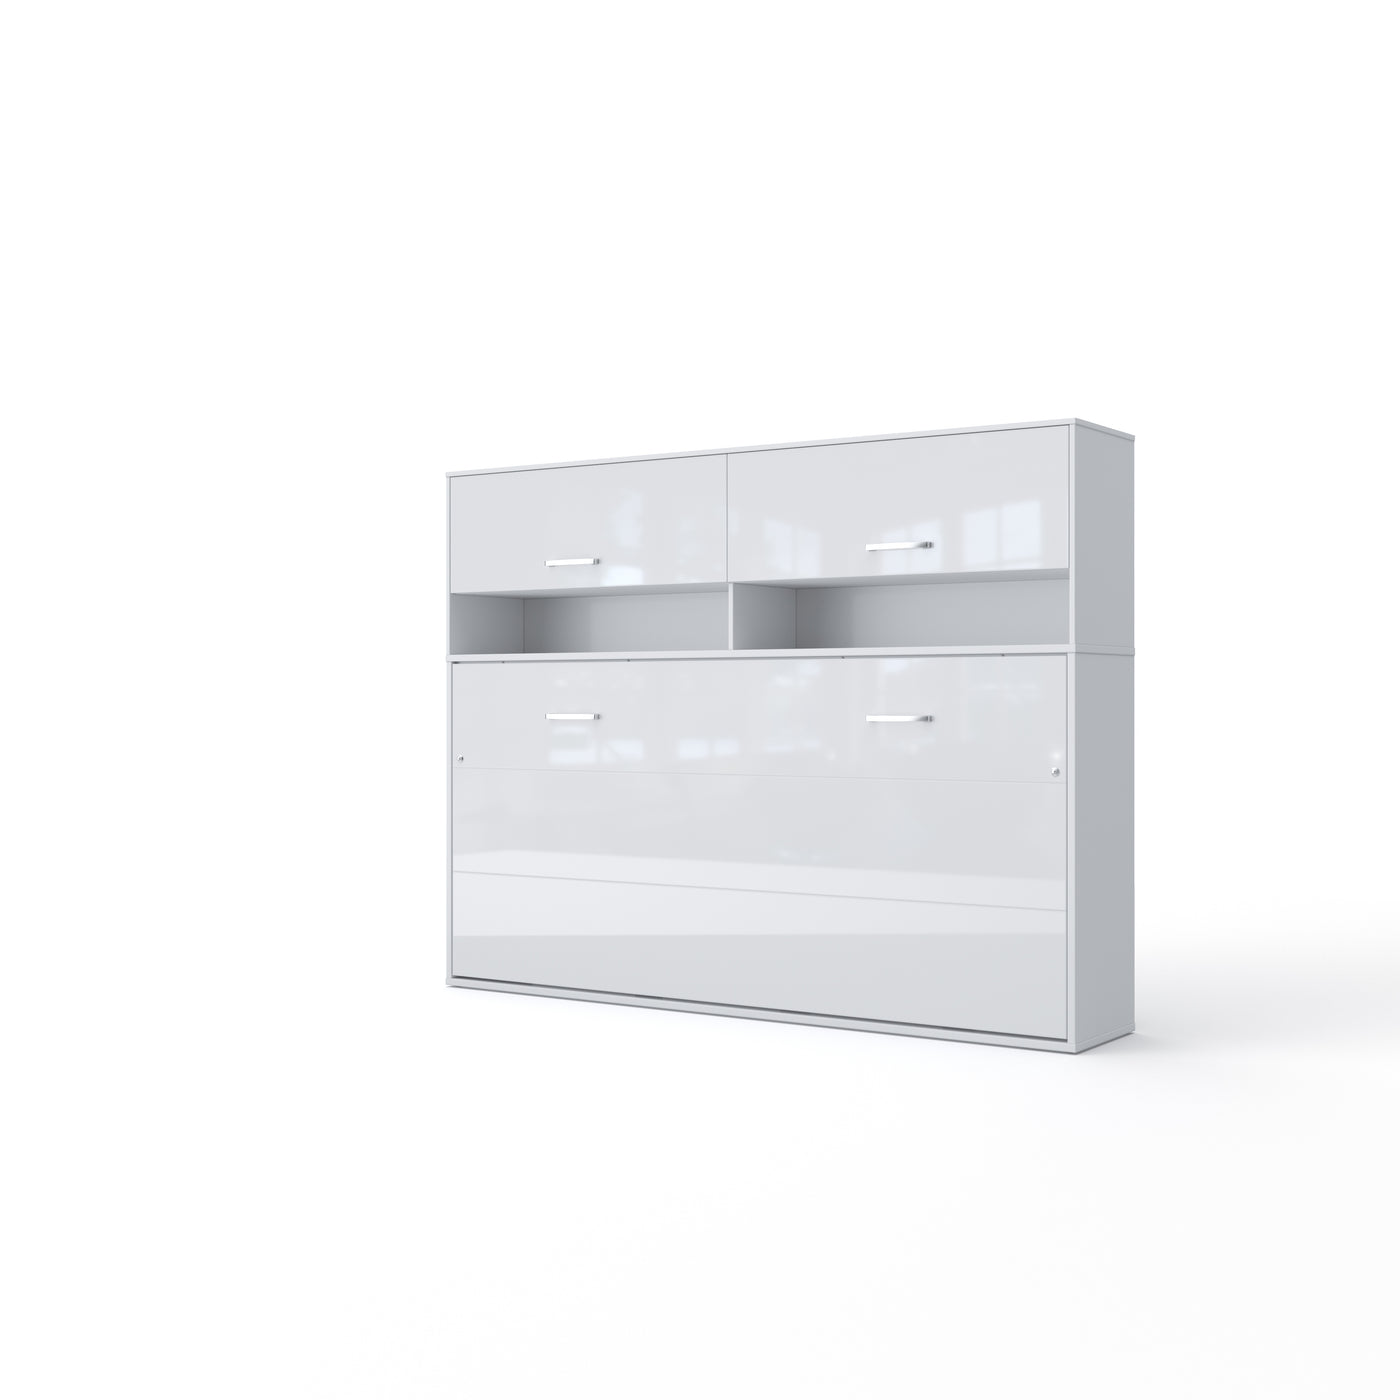 Invento Horizontal Wall Bed, European Twin Size with A Cabinet On Top White/White;